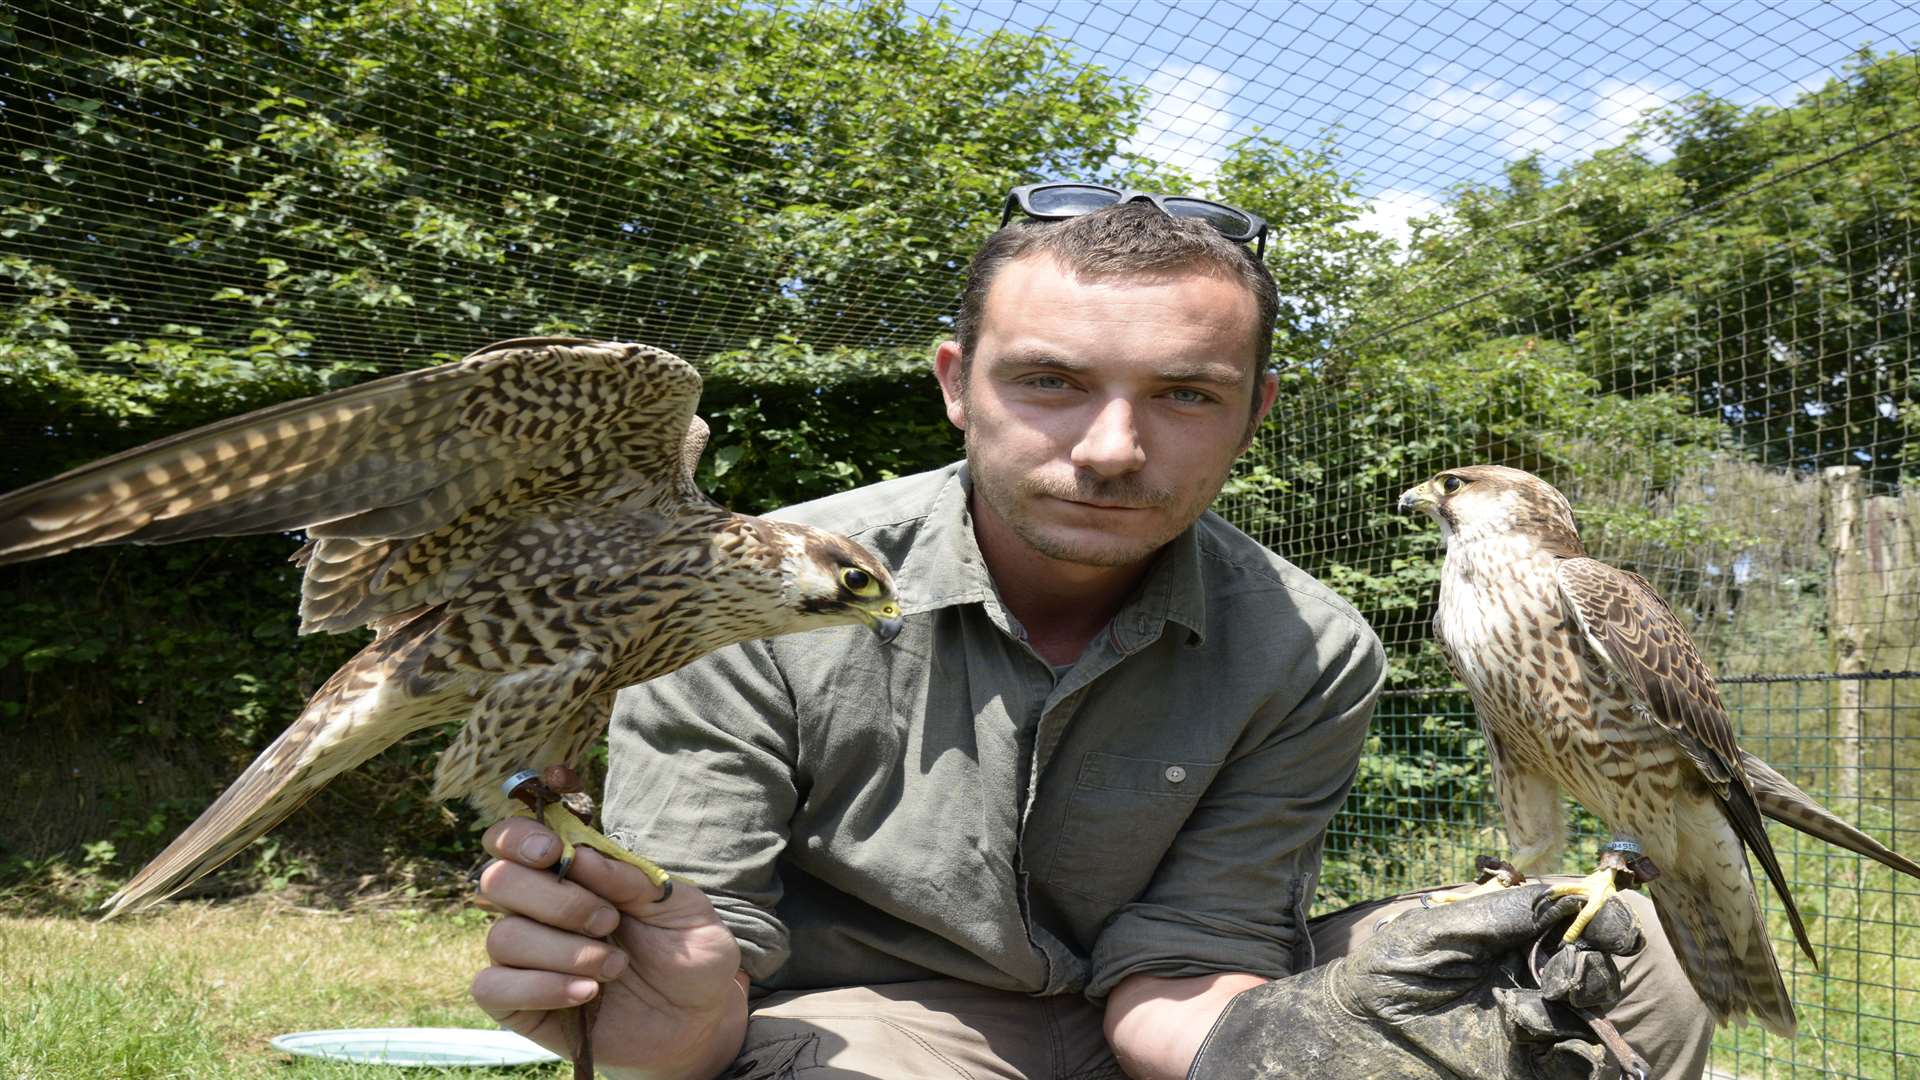 Jonathan Ames of Lullingstone Lane, Eynsford with his perigrine falcons Dick and Dom. Picture: Chris Davey